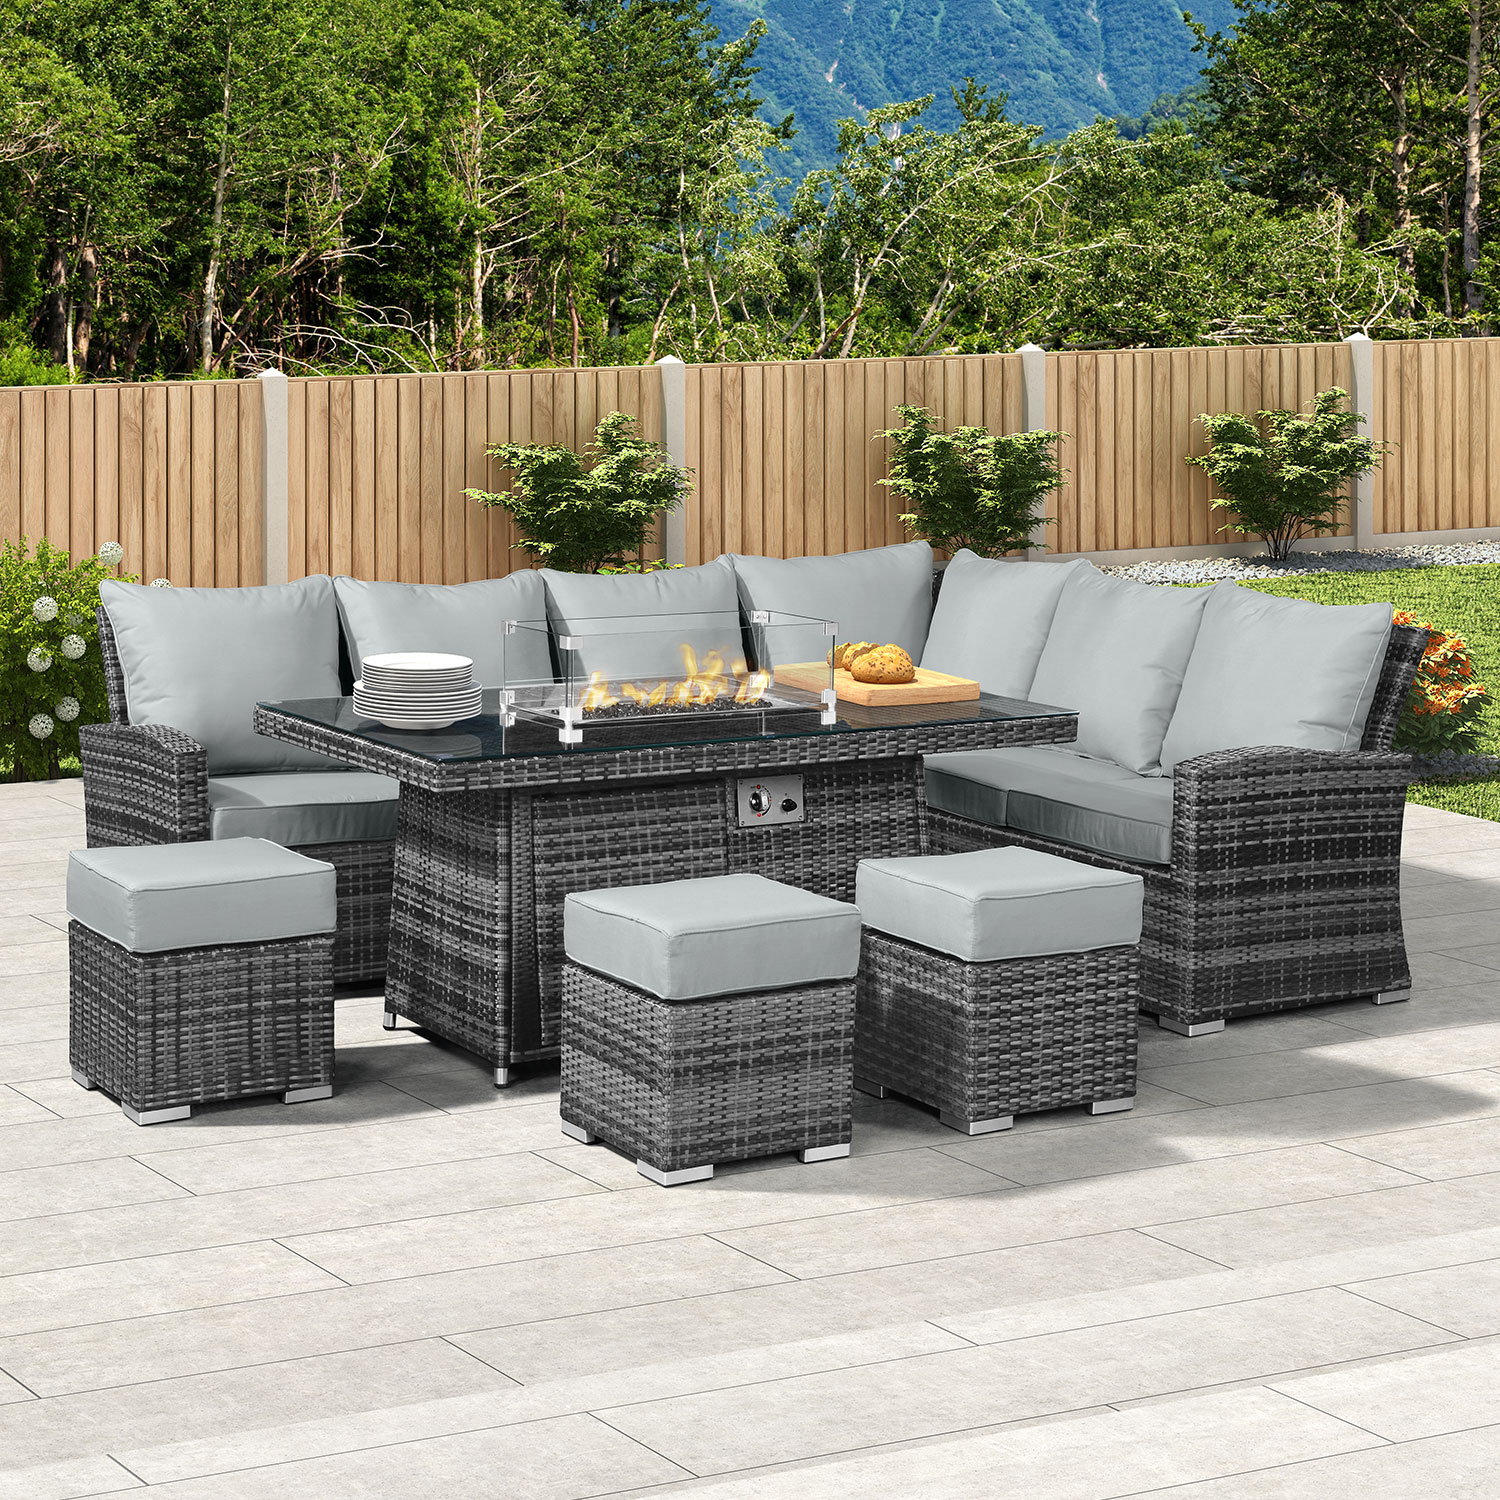 Cambridge Fireglow Right Hand Rattan, Patio Dining Set With Fire Pit In The Middle